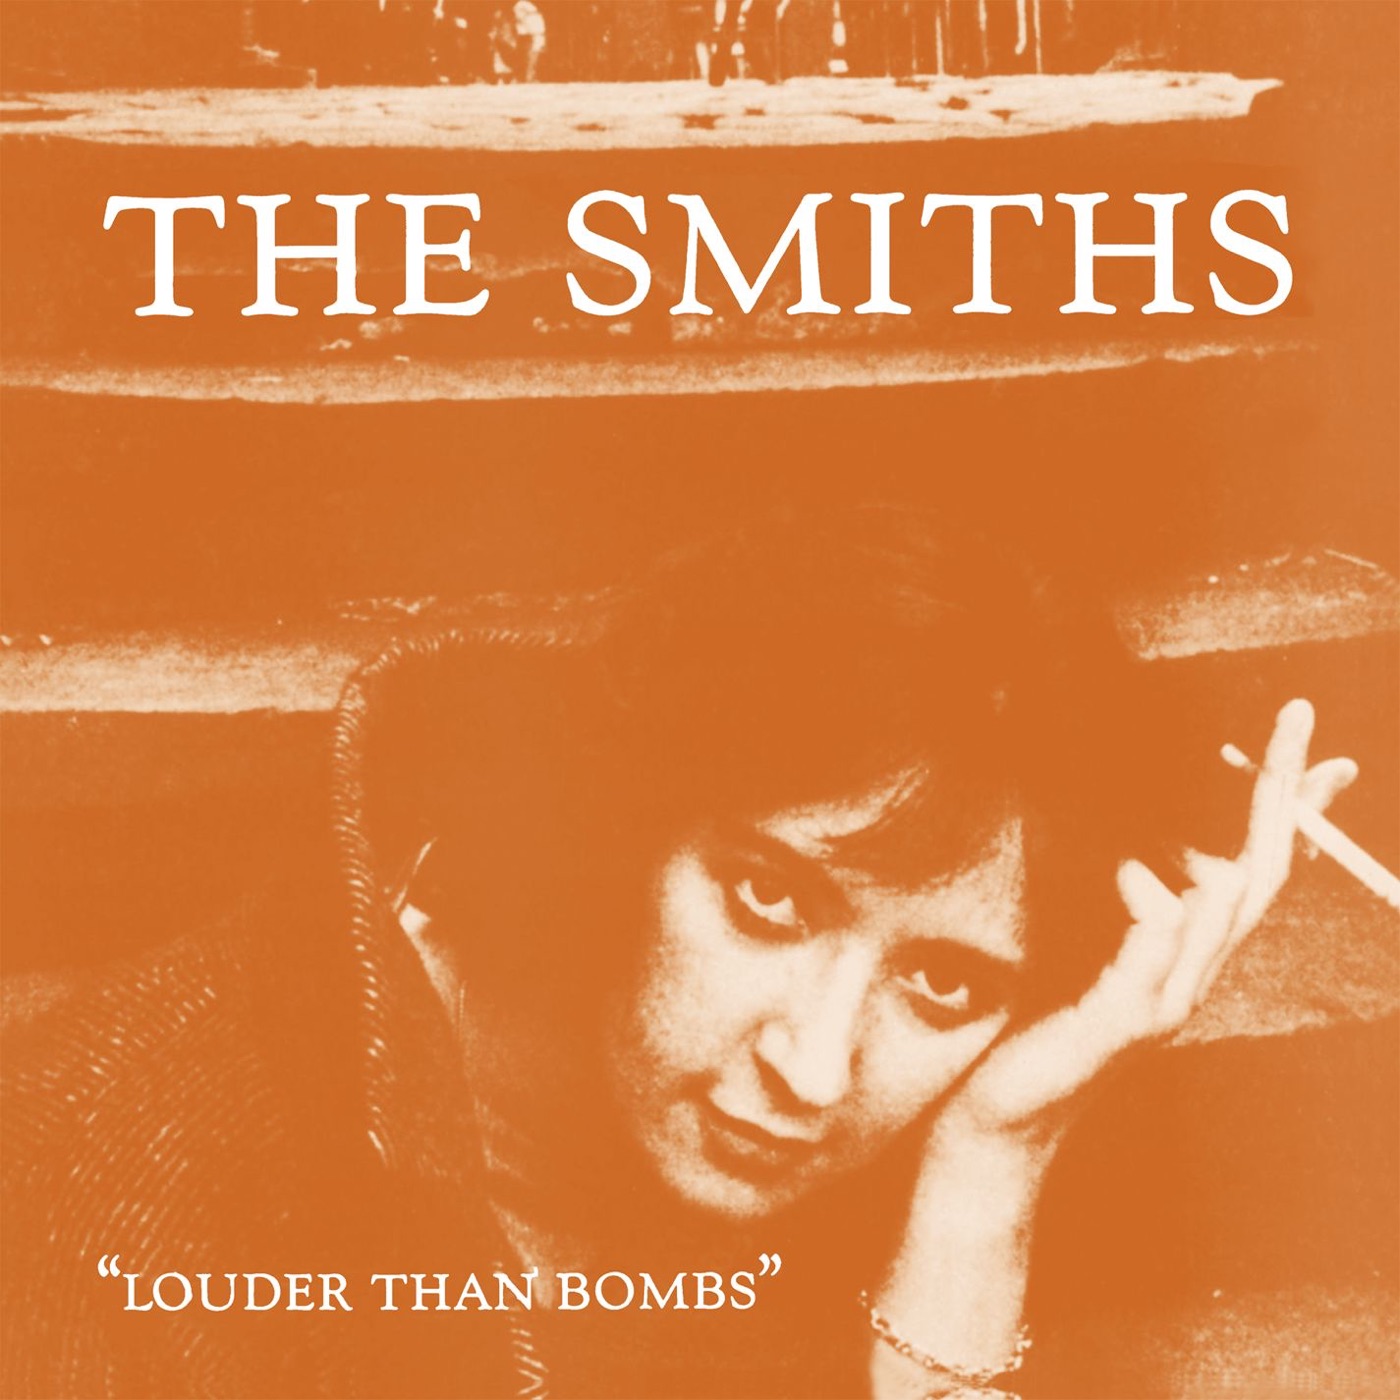 Louder Than Bombs by The Smiths